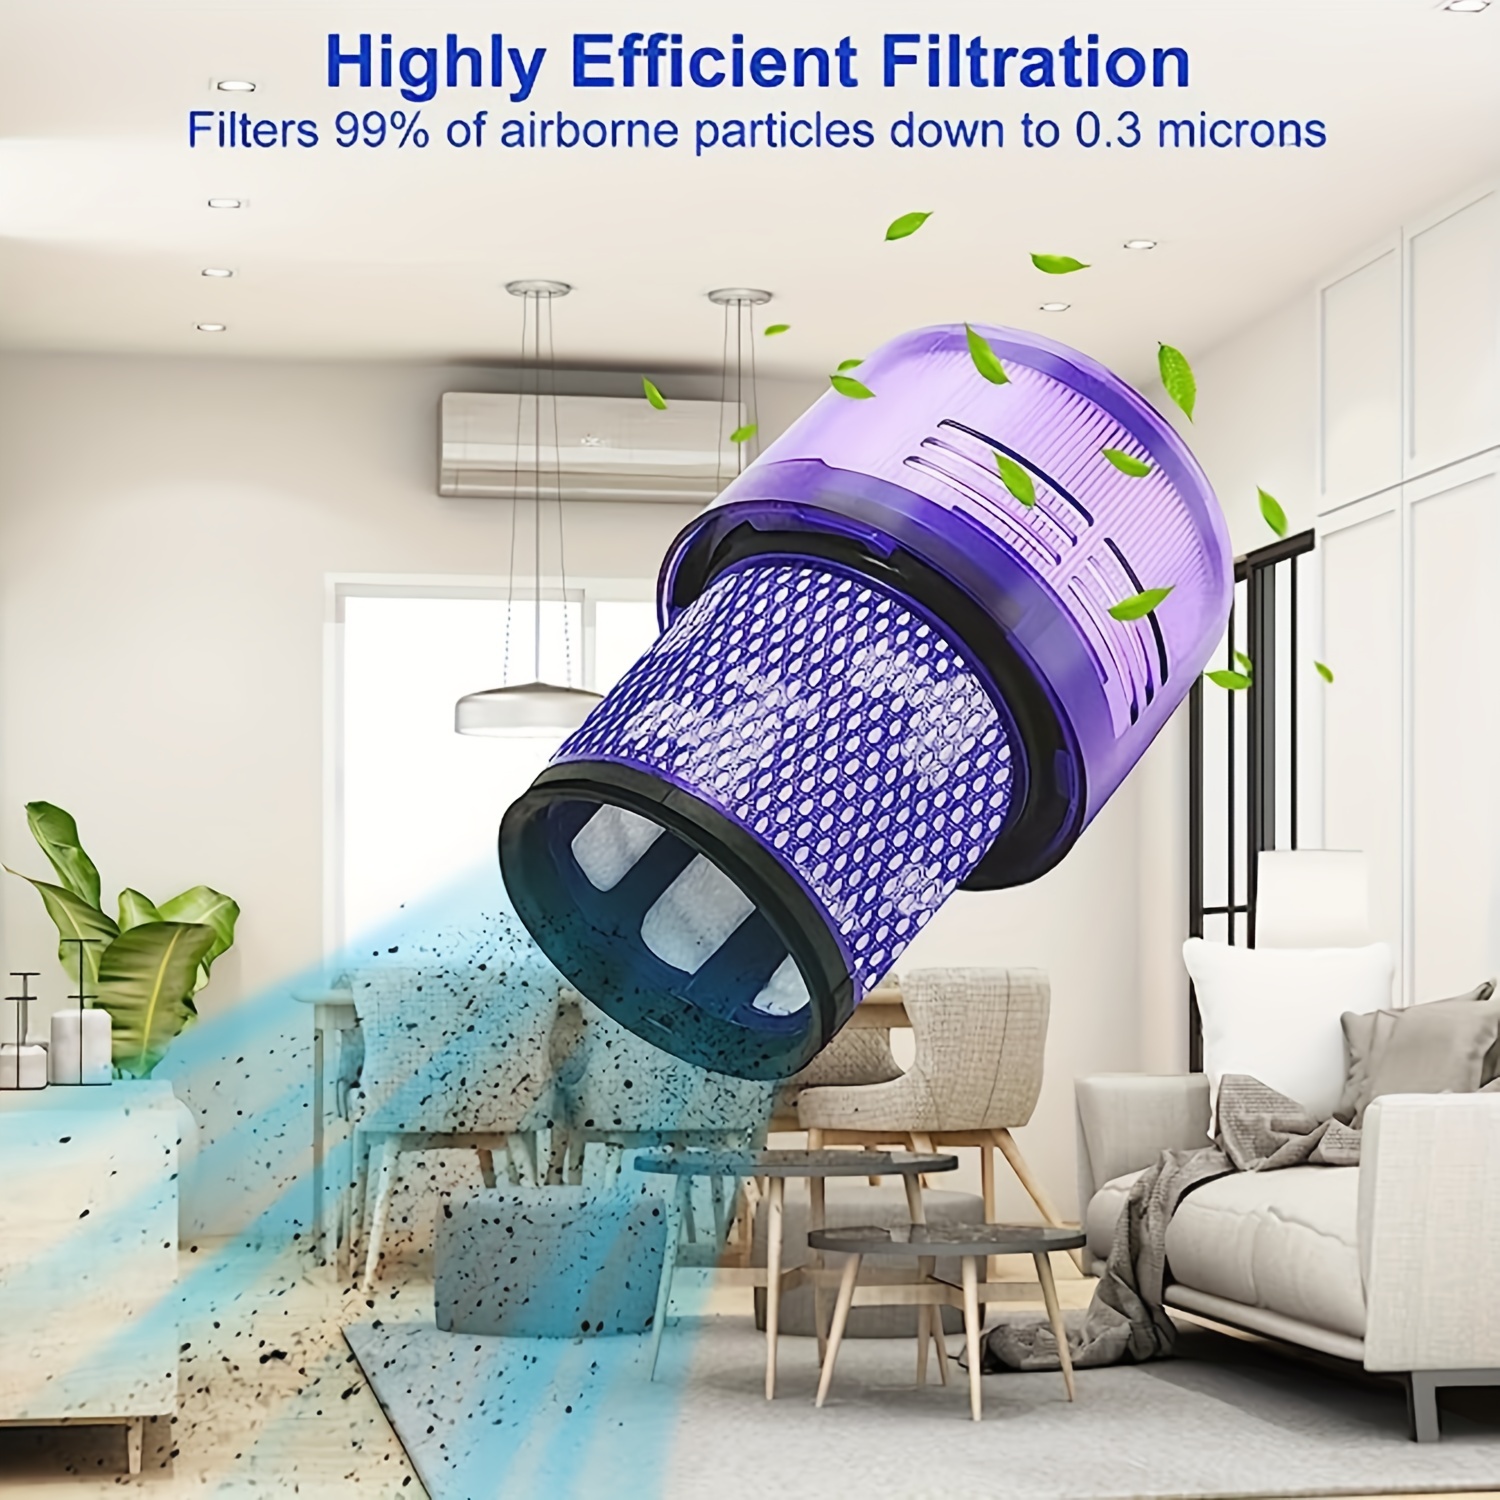 V11 Filter for Dyson 1 Pack Filter Replacement for Dyson V11 Animal V11  Torque Drive V15 Detect Cordless Vacuum Filter Replace Part # 970013-02